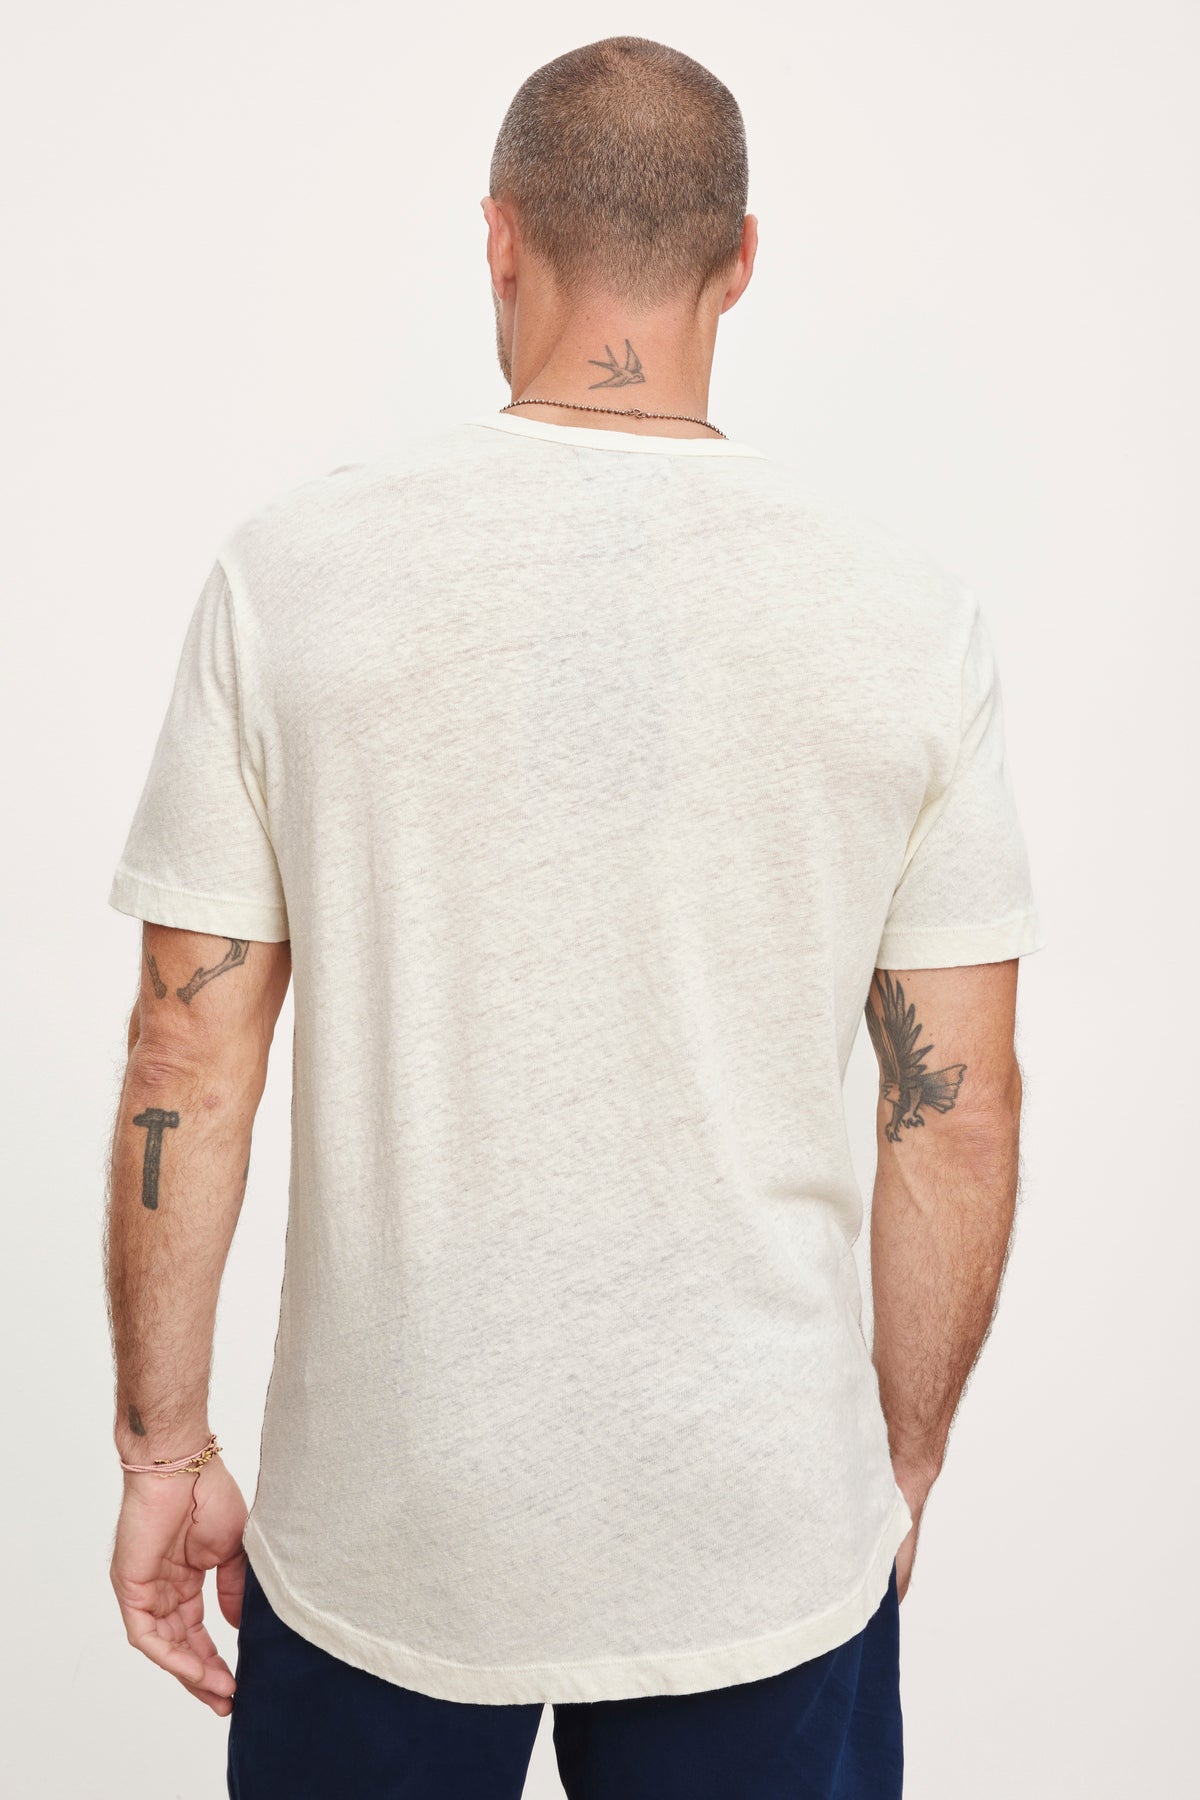 Rear view of a man wearing a Velvet by Graham & Spencer DAVEY TEE showing tattoos on his arms and neck.-36732521316545